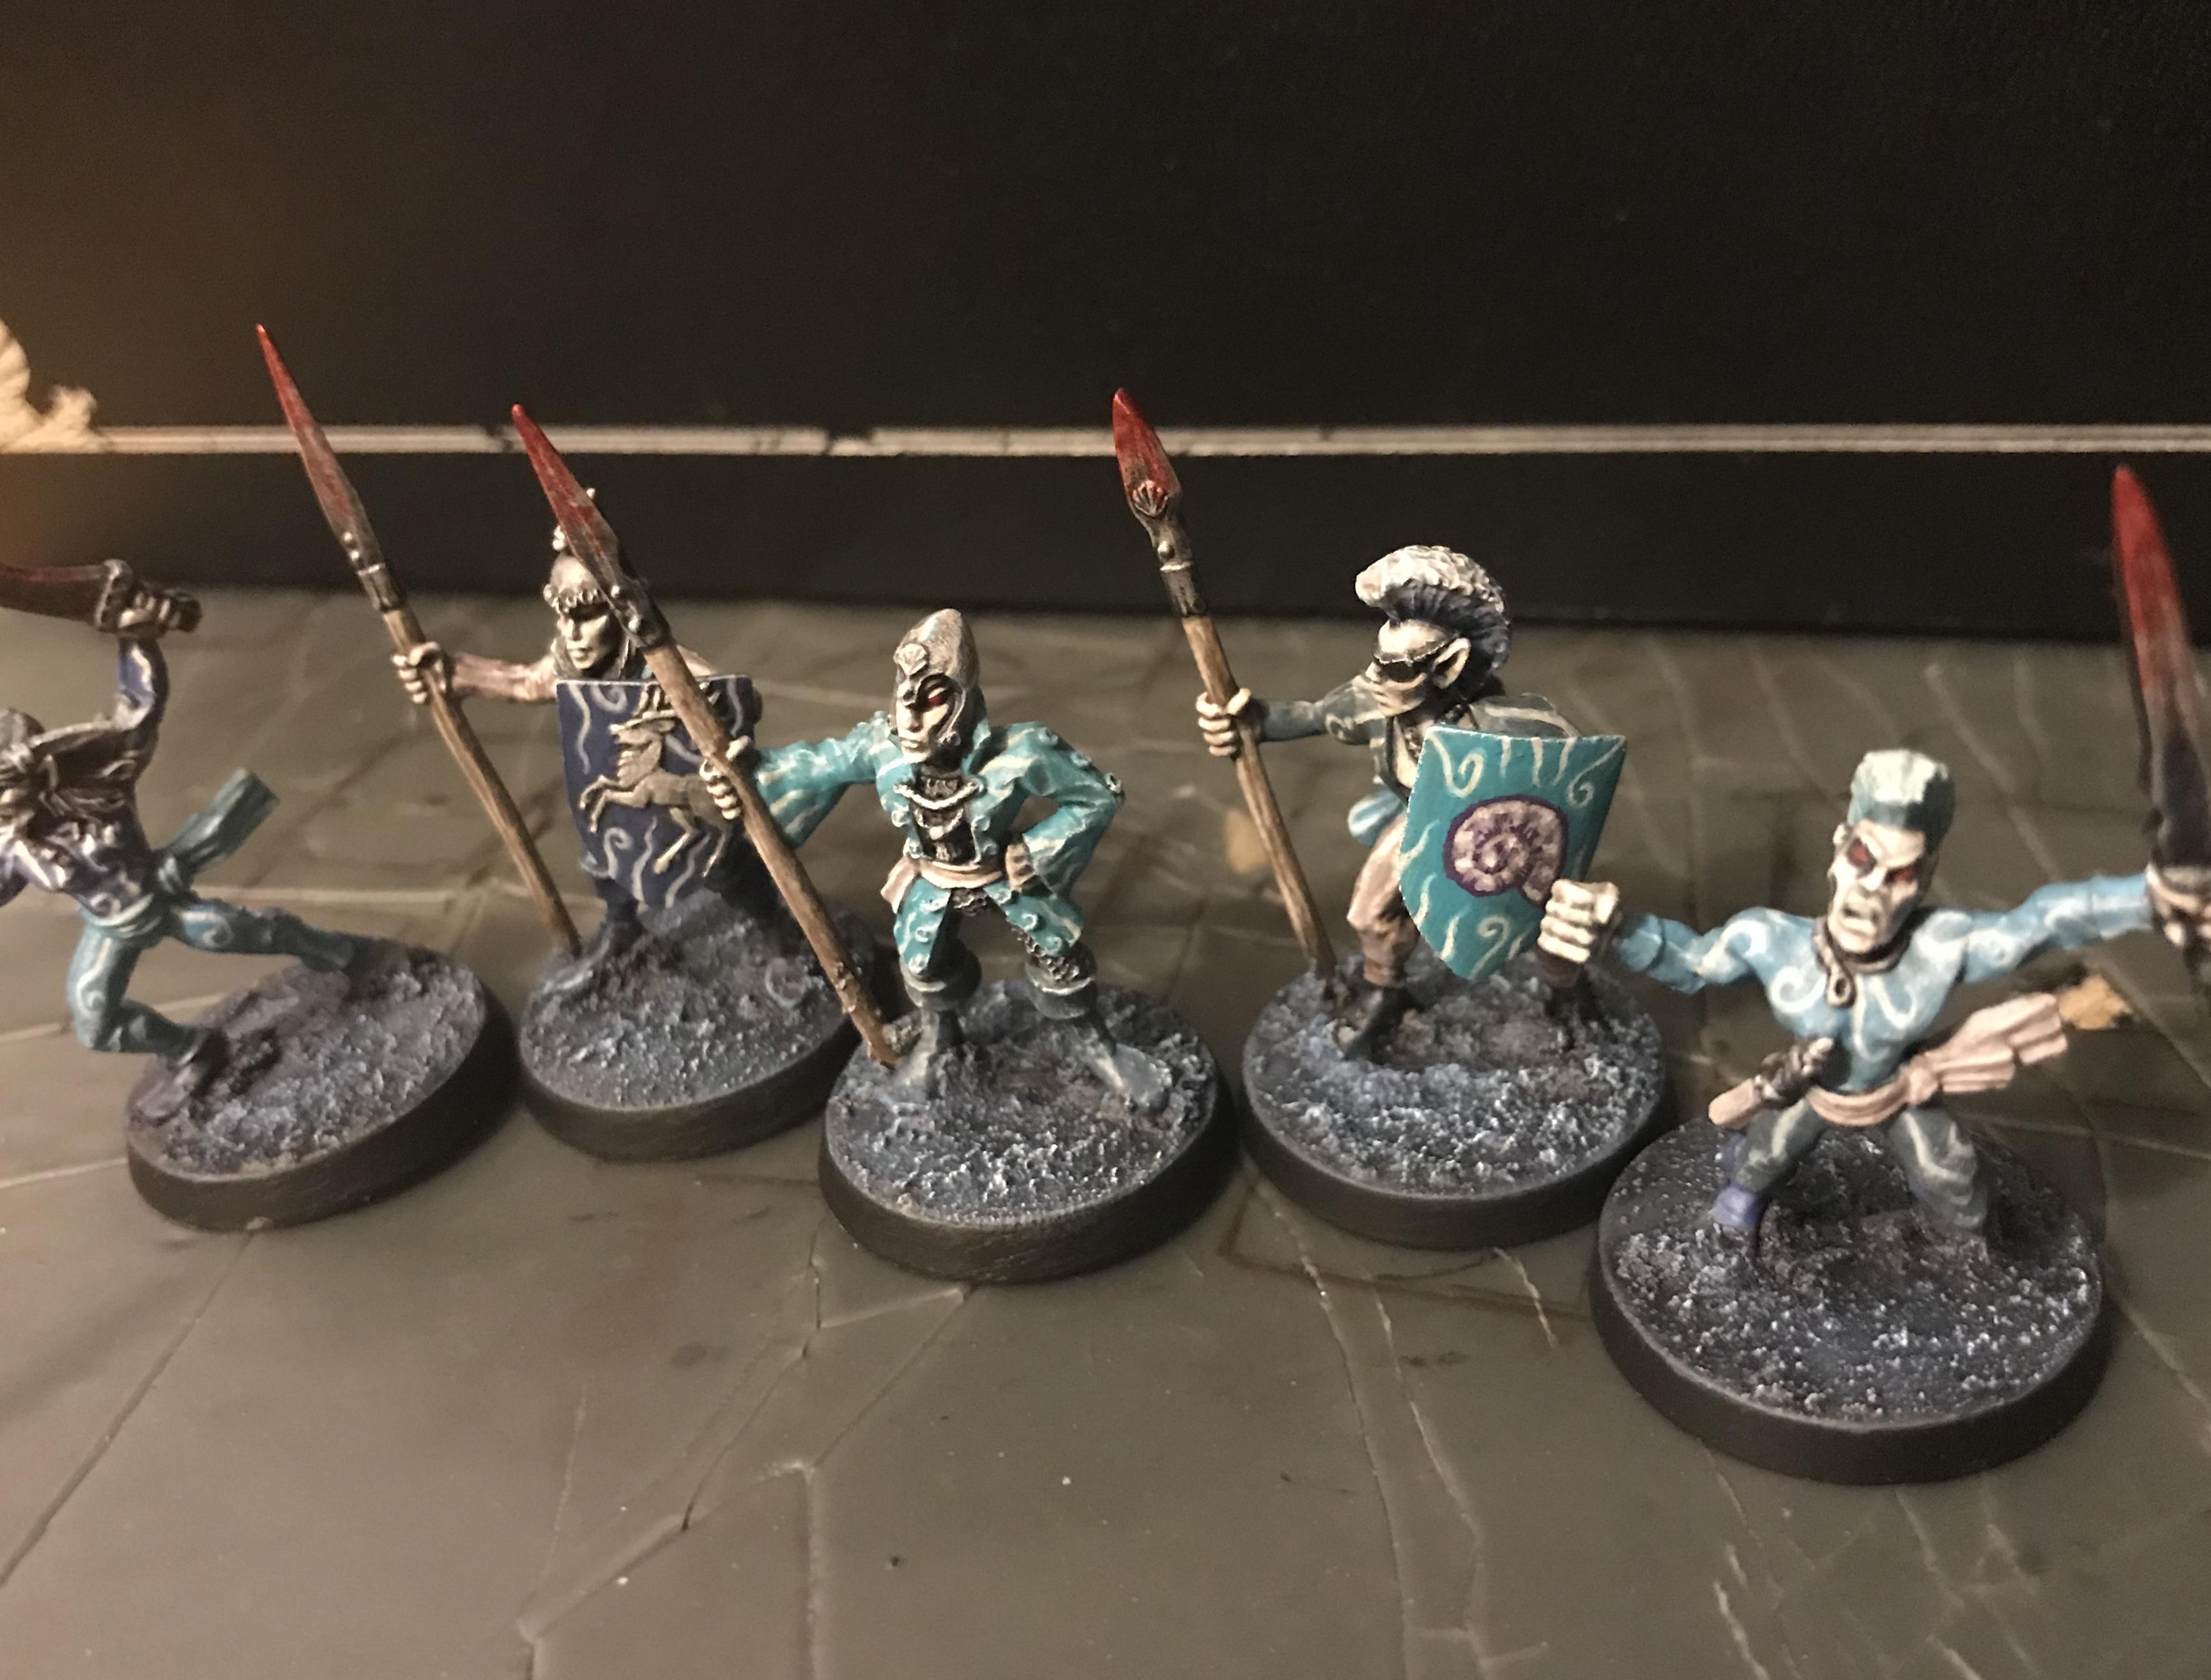 25mm, Aelf, Aelfs, Aelves, Age, Age Of Sigmar, And, Aquatic, Arrow, Battle, Battles, Blue, Bow, Citadel, City, Cold, Colors, Creature, Creatures, Dark, Elfs, Elves, End, Guard, High, Infantry, Lothern, Marauders, Mariner, Mariners, Medieval, Metal, Miniatures, Minis, Models, Mordheim, Mortal, Of, Old, Olde, Oldhammer, Painted, Play, Realms, Role, Sailing, Sailor, Sails, Sea, Sea Elves, Sigmar, Skirmish, Soldiers, Space Marines, Spear, Sword, The, Times, Vibrant, Warhammer Fantasy, Whf, Whfbrp, Woodland, World, Worlde